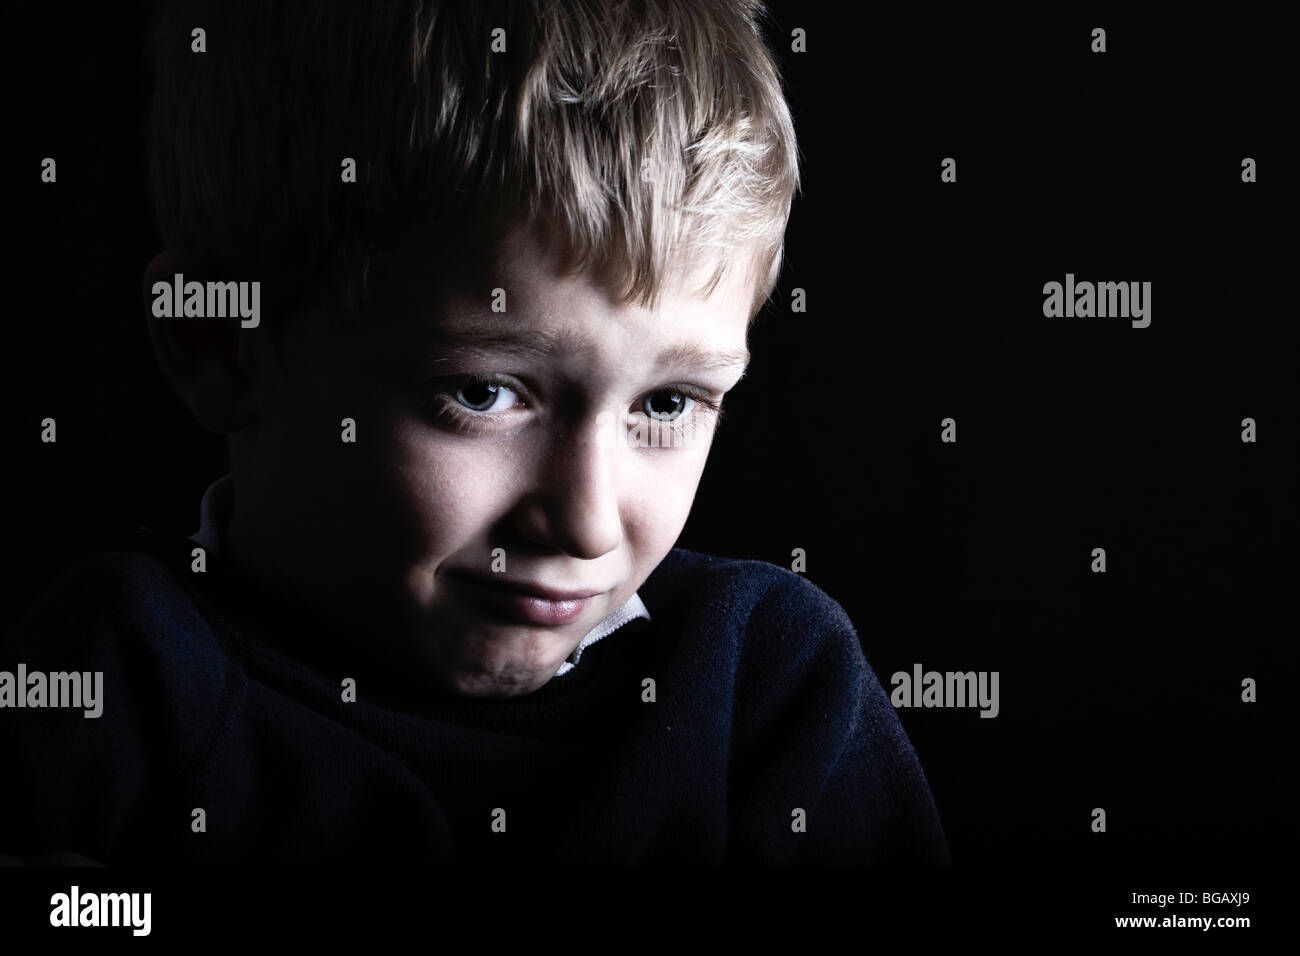 a fearful and scared little boy Stock Photo